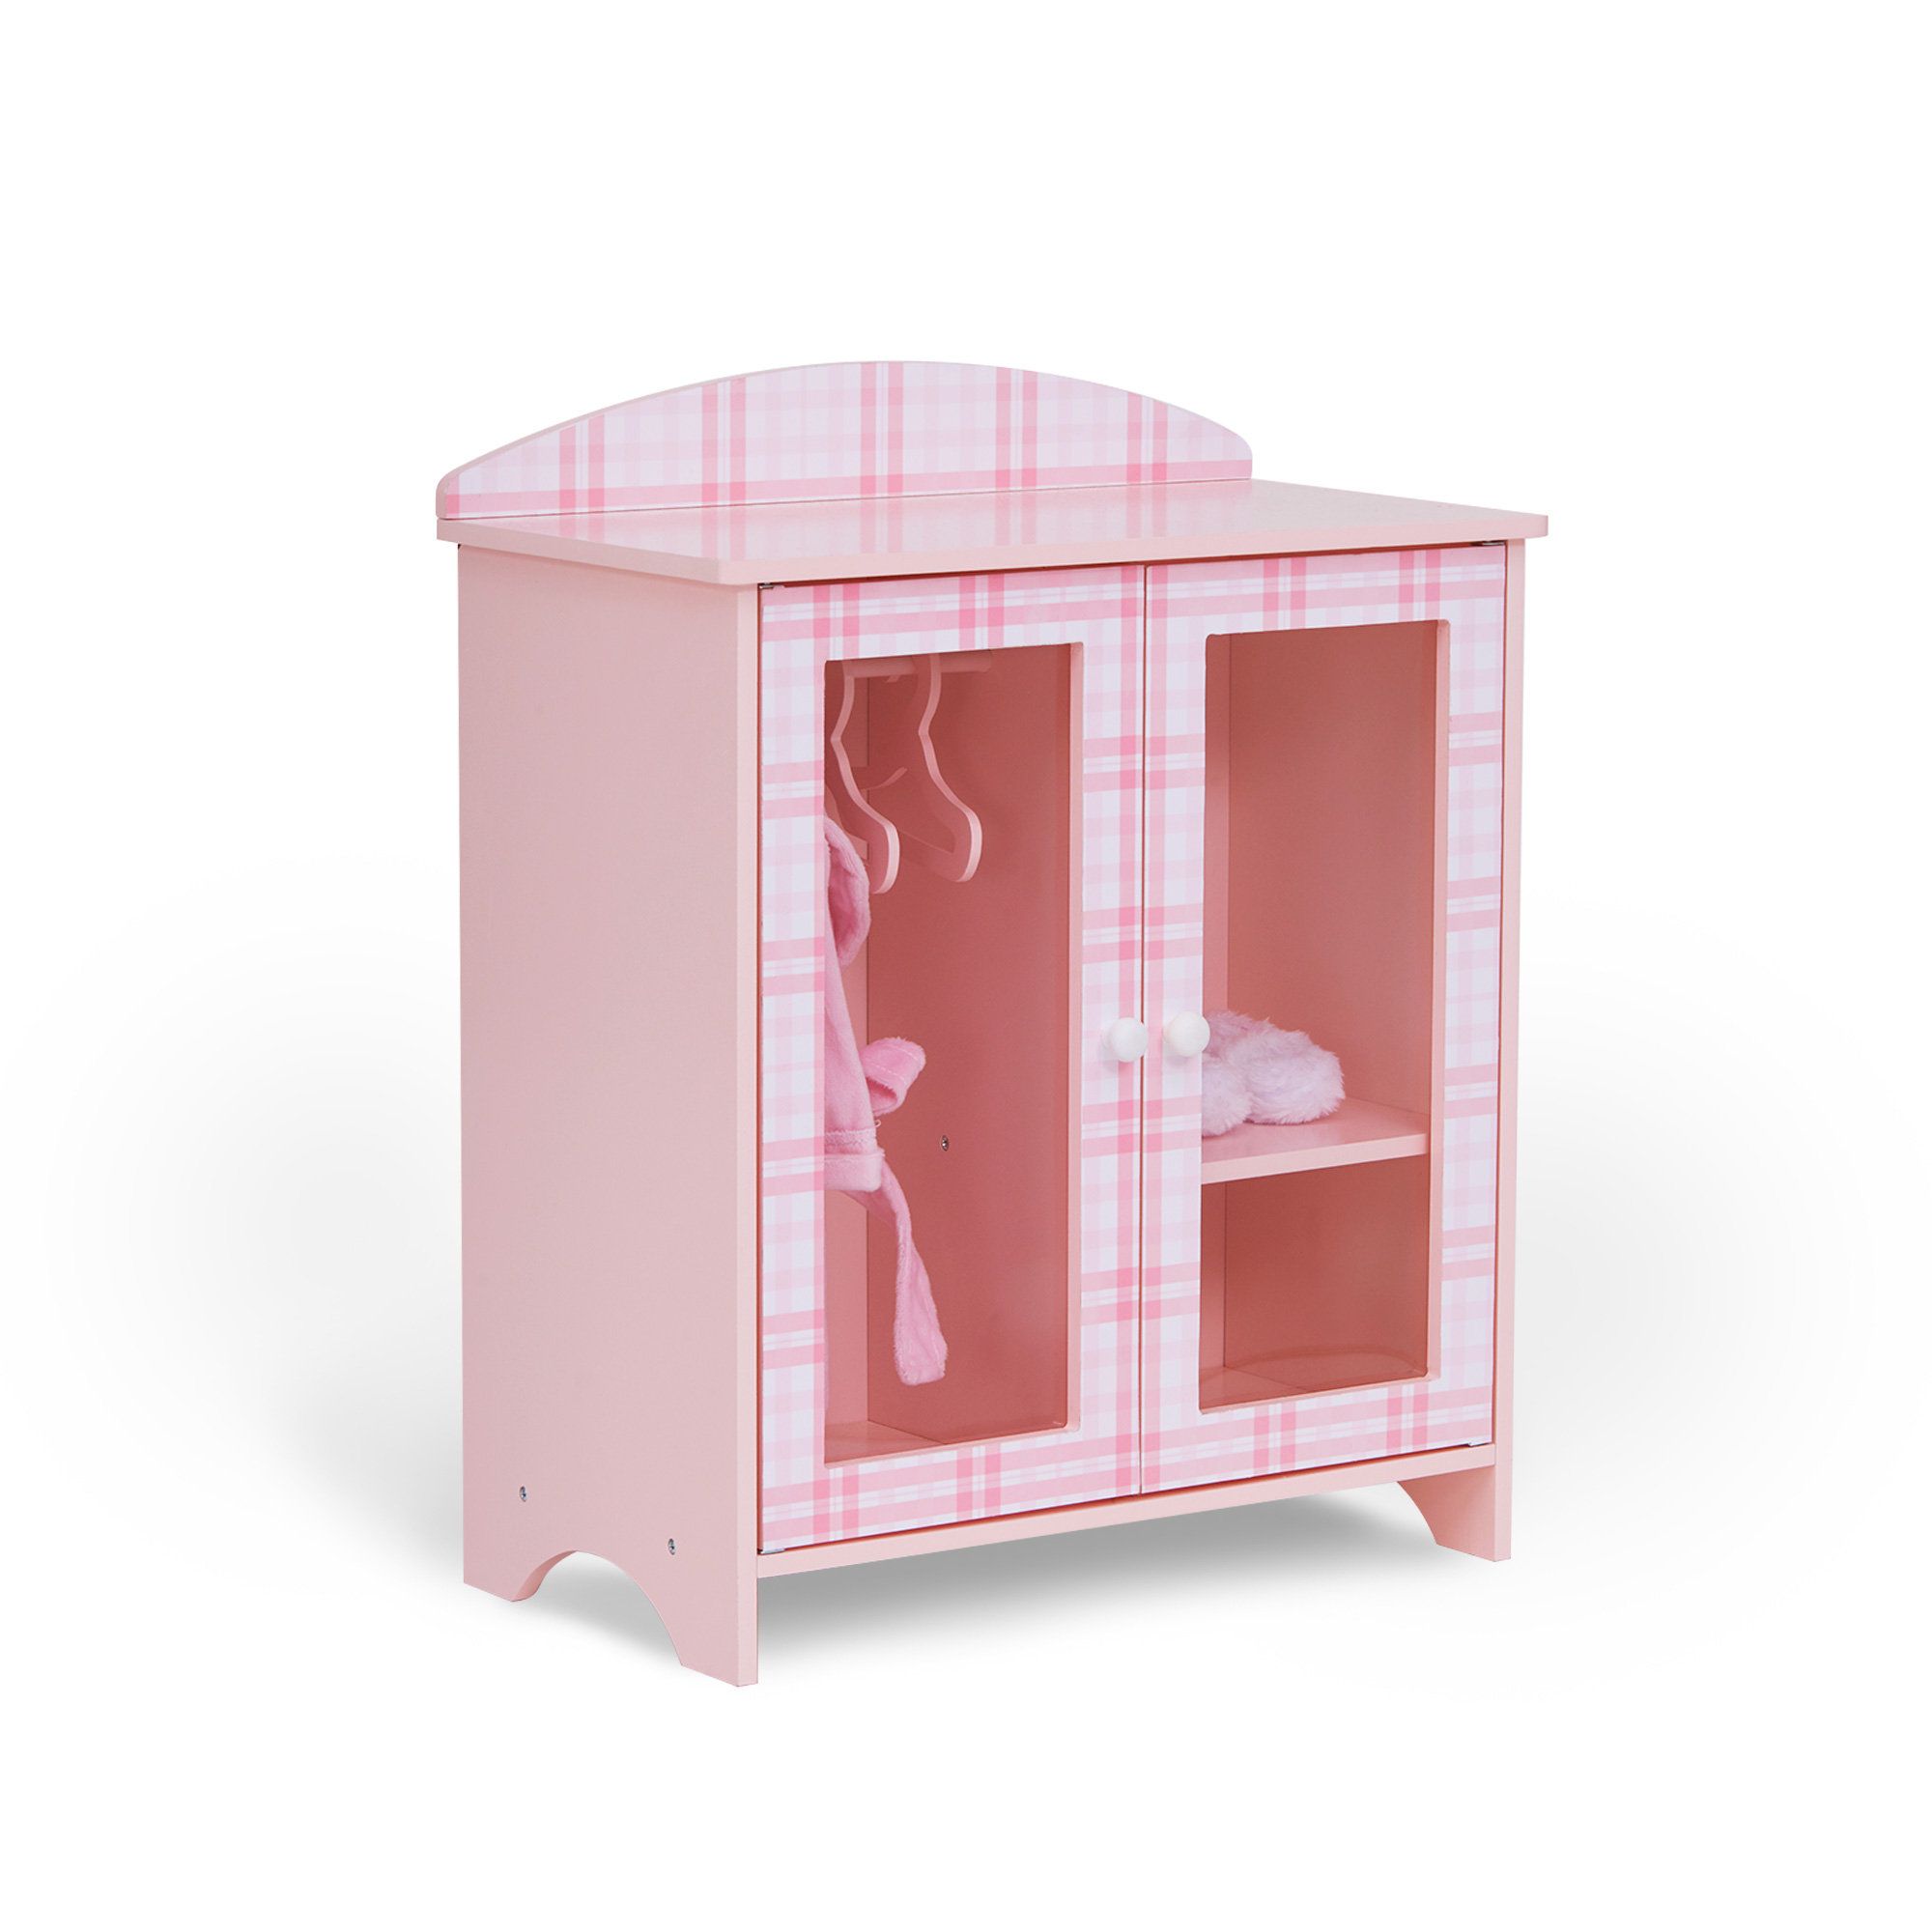 Sophia's Princess Closet Dollhouse Furniture And Accessories | Wayfair Intended For The Princess Wardrobes (Gallery 13 of 20)